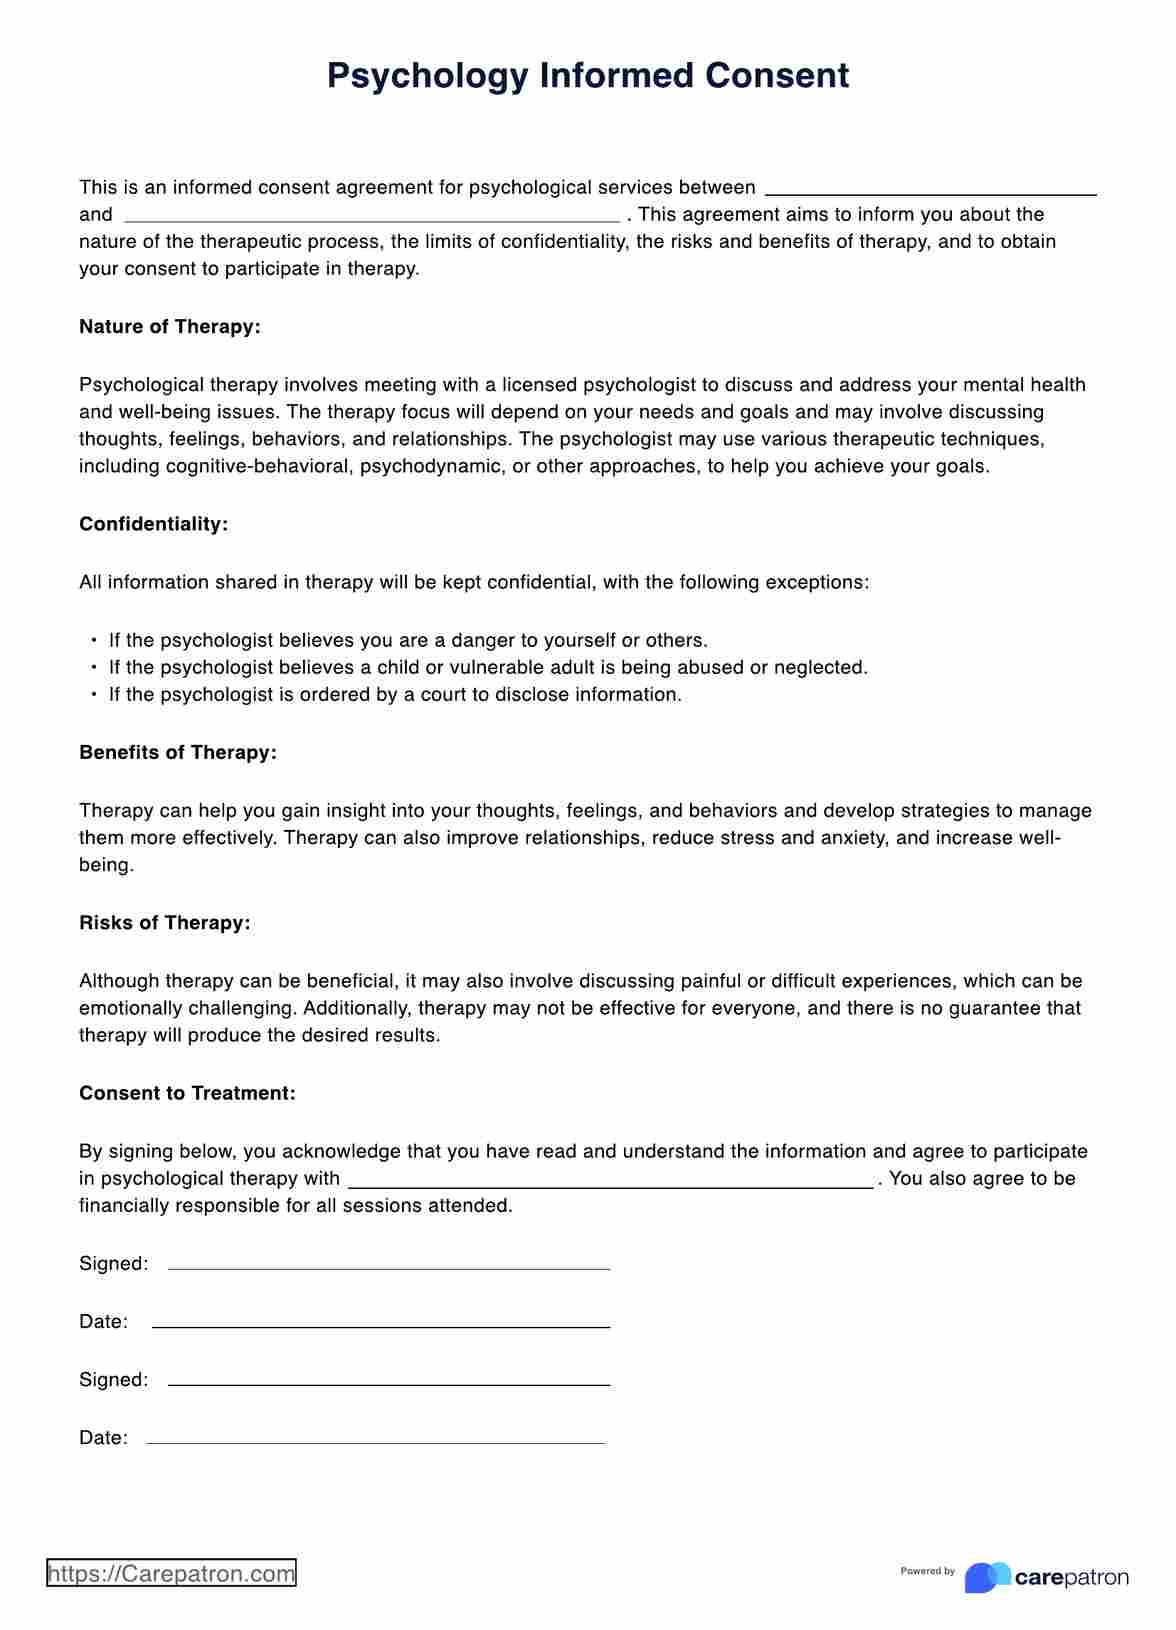 Psychology Informed Consent Form PDF Example